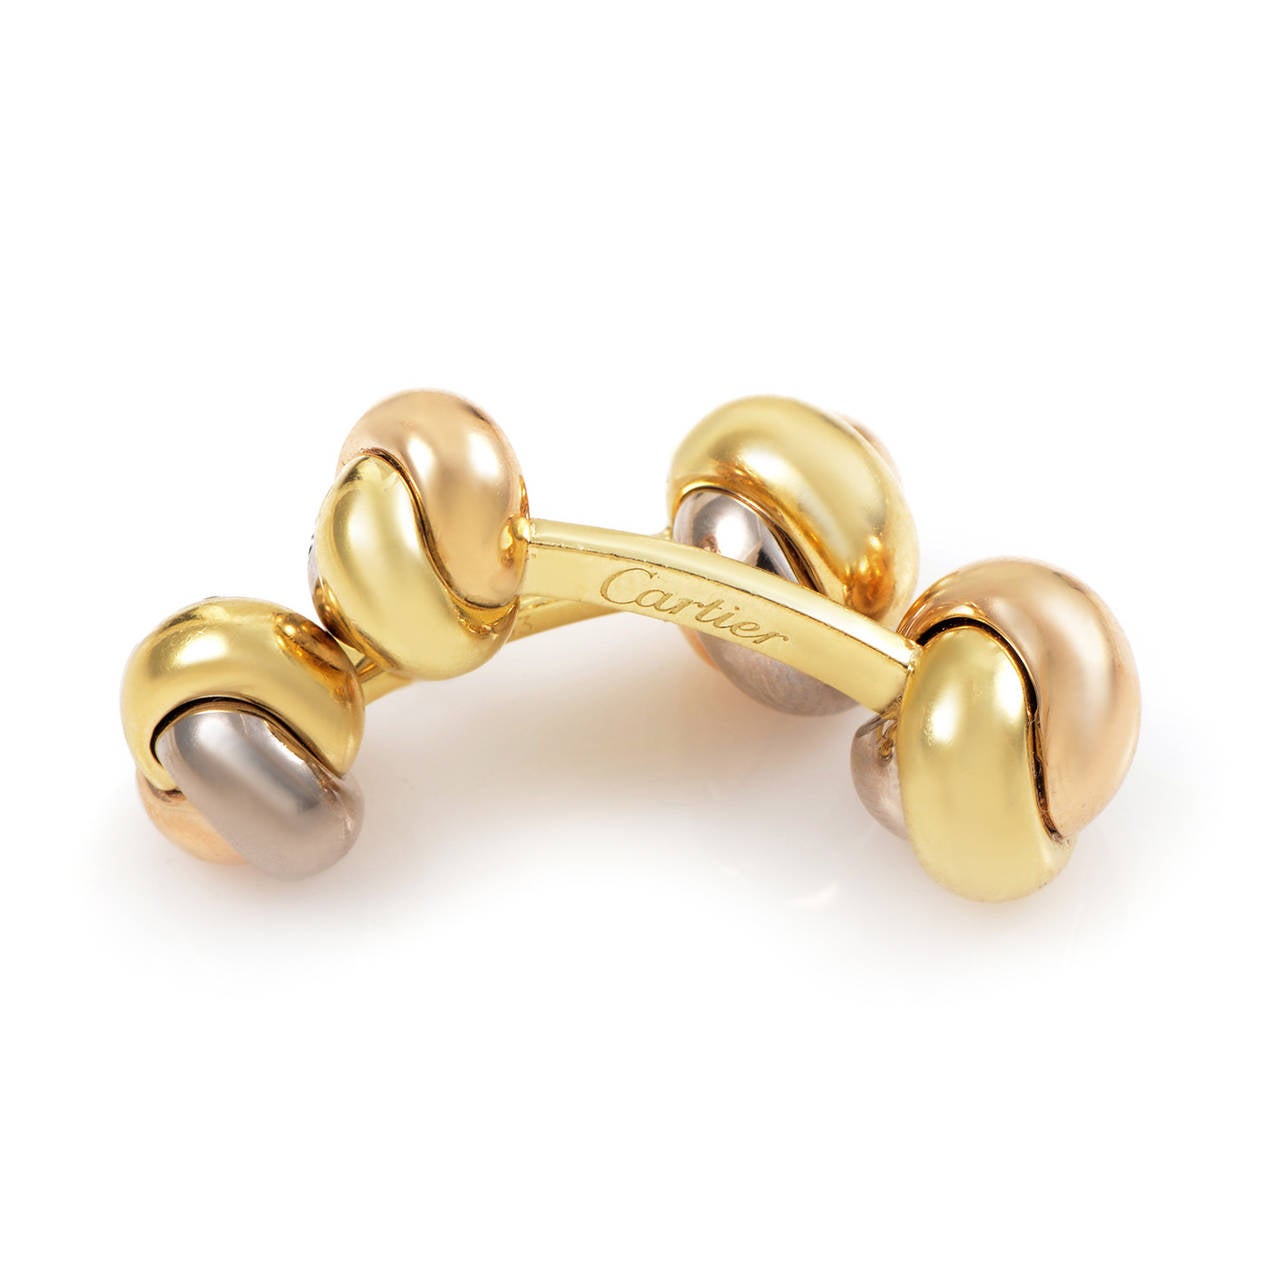 This dazzling pair of cufflinks from Cartier's Trinity collection are perfect for a man or a woman. The cufflinks are made of a combination of 18K white, yellow and rose gold.